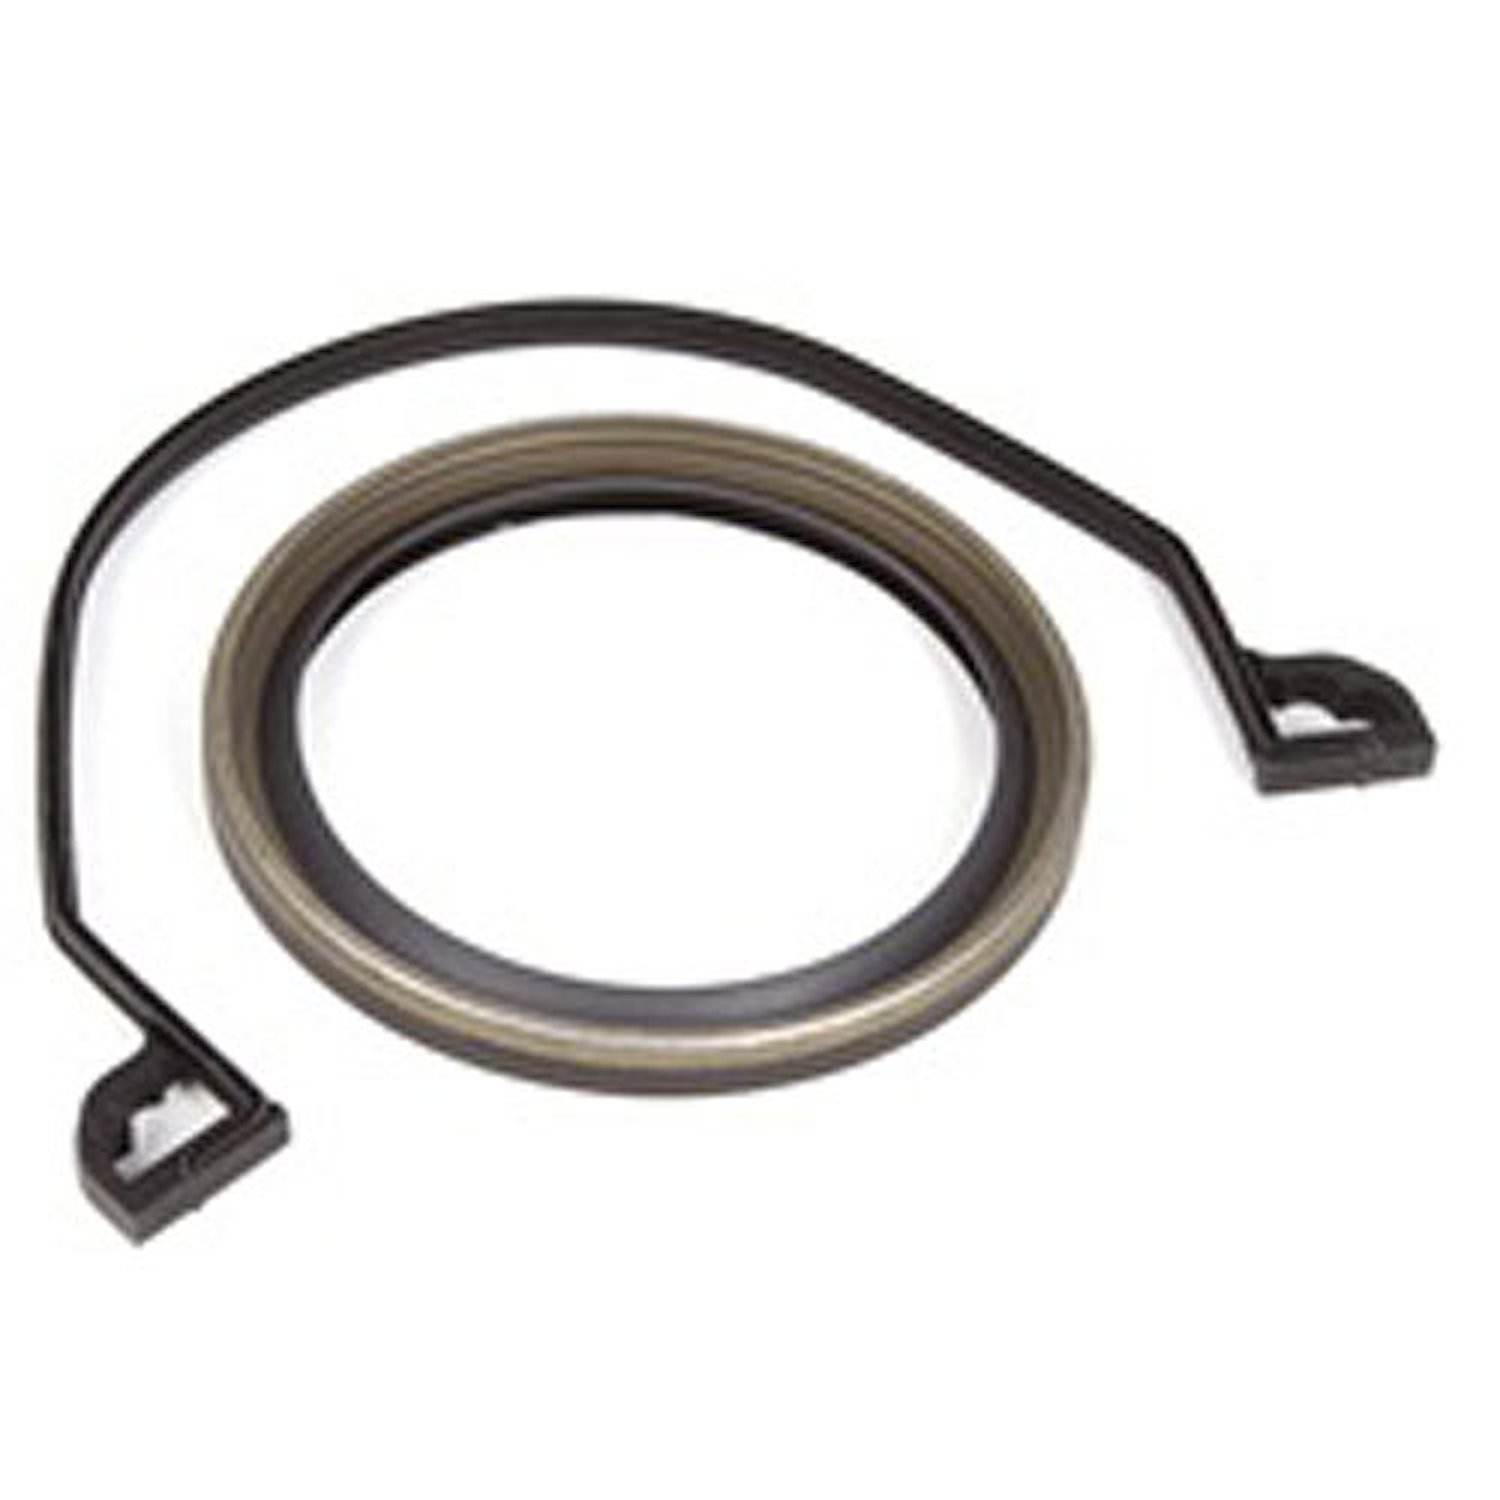 This rear main seal from Omix-ADA fits the 5.7L engine in 05-10 Jeep Grand Cherokees Commanders and